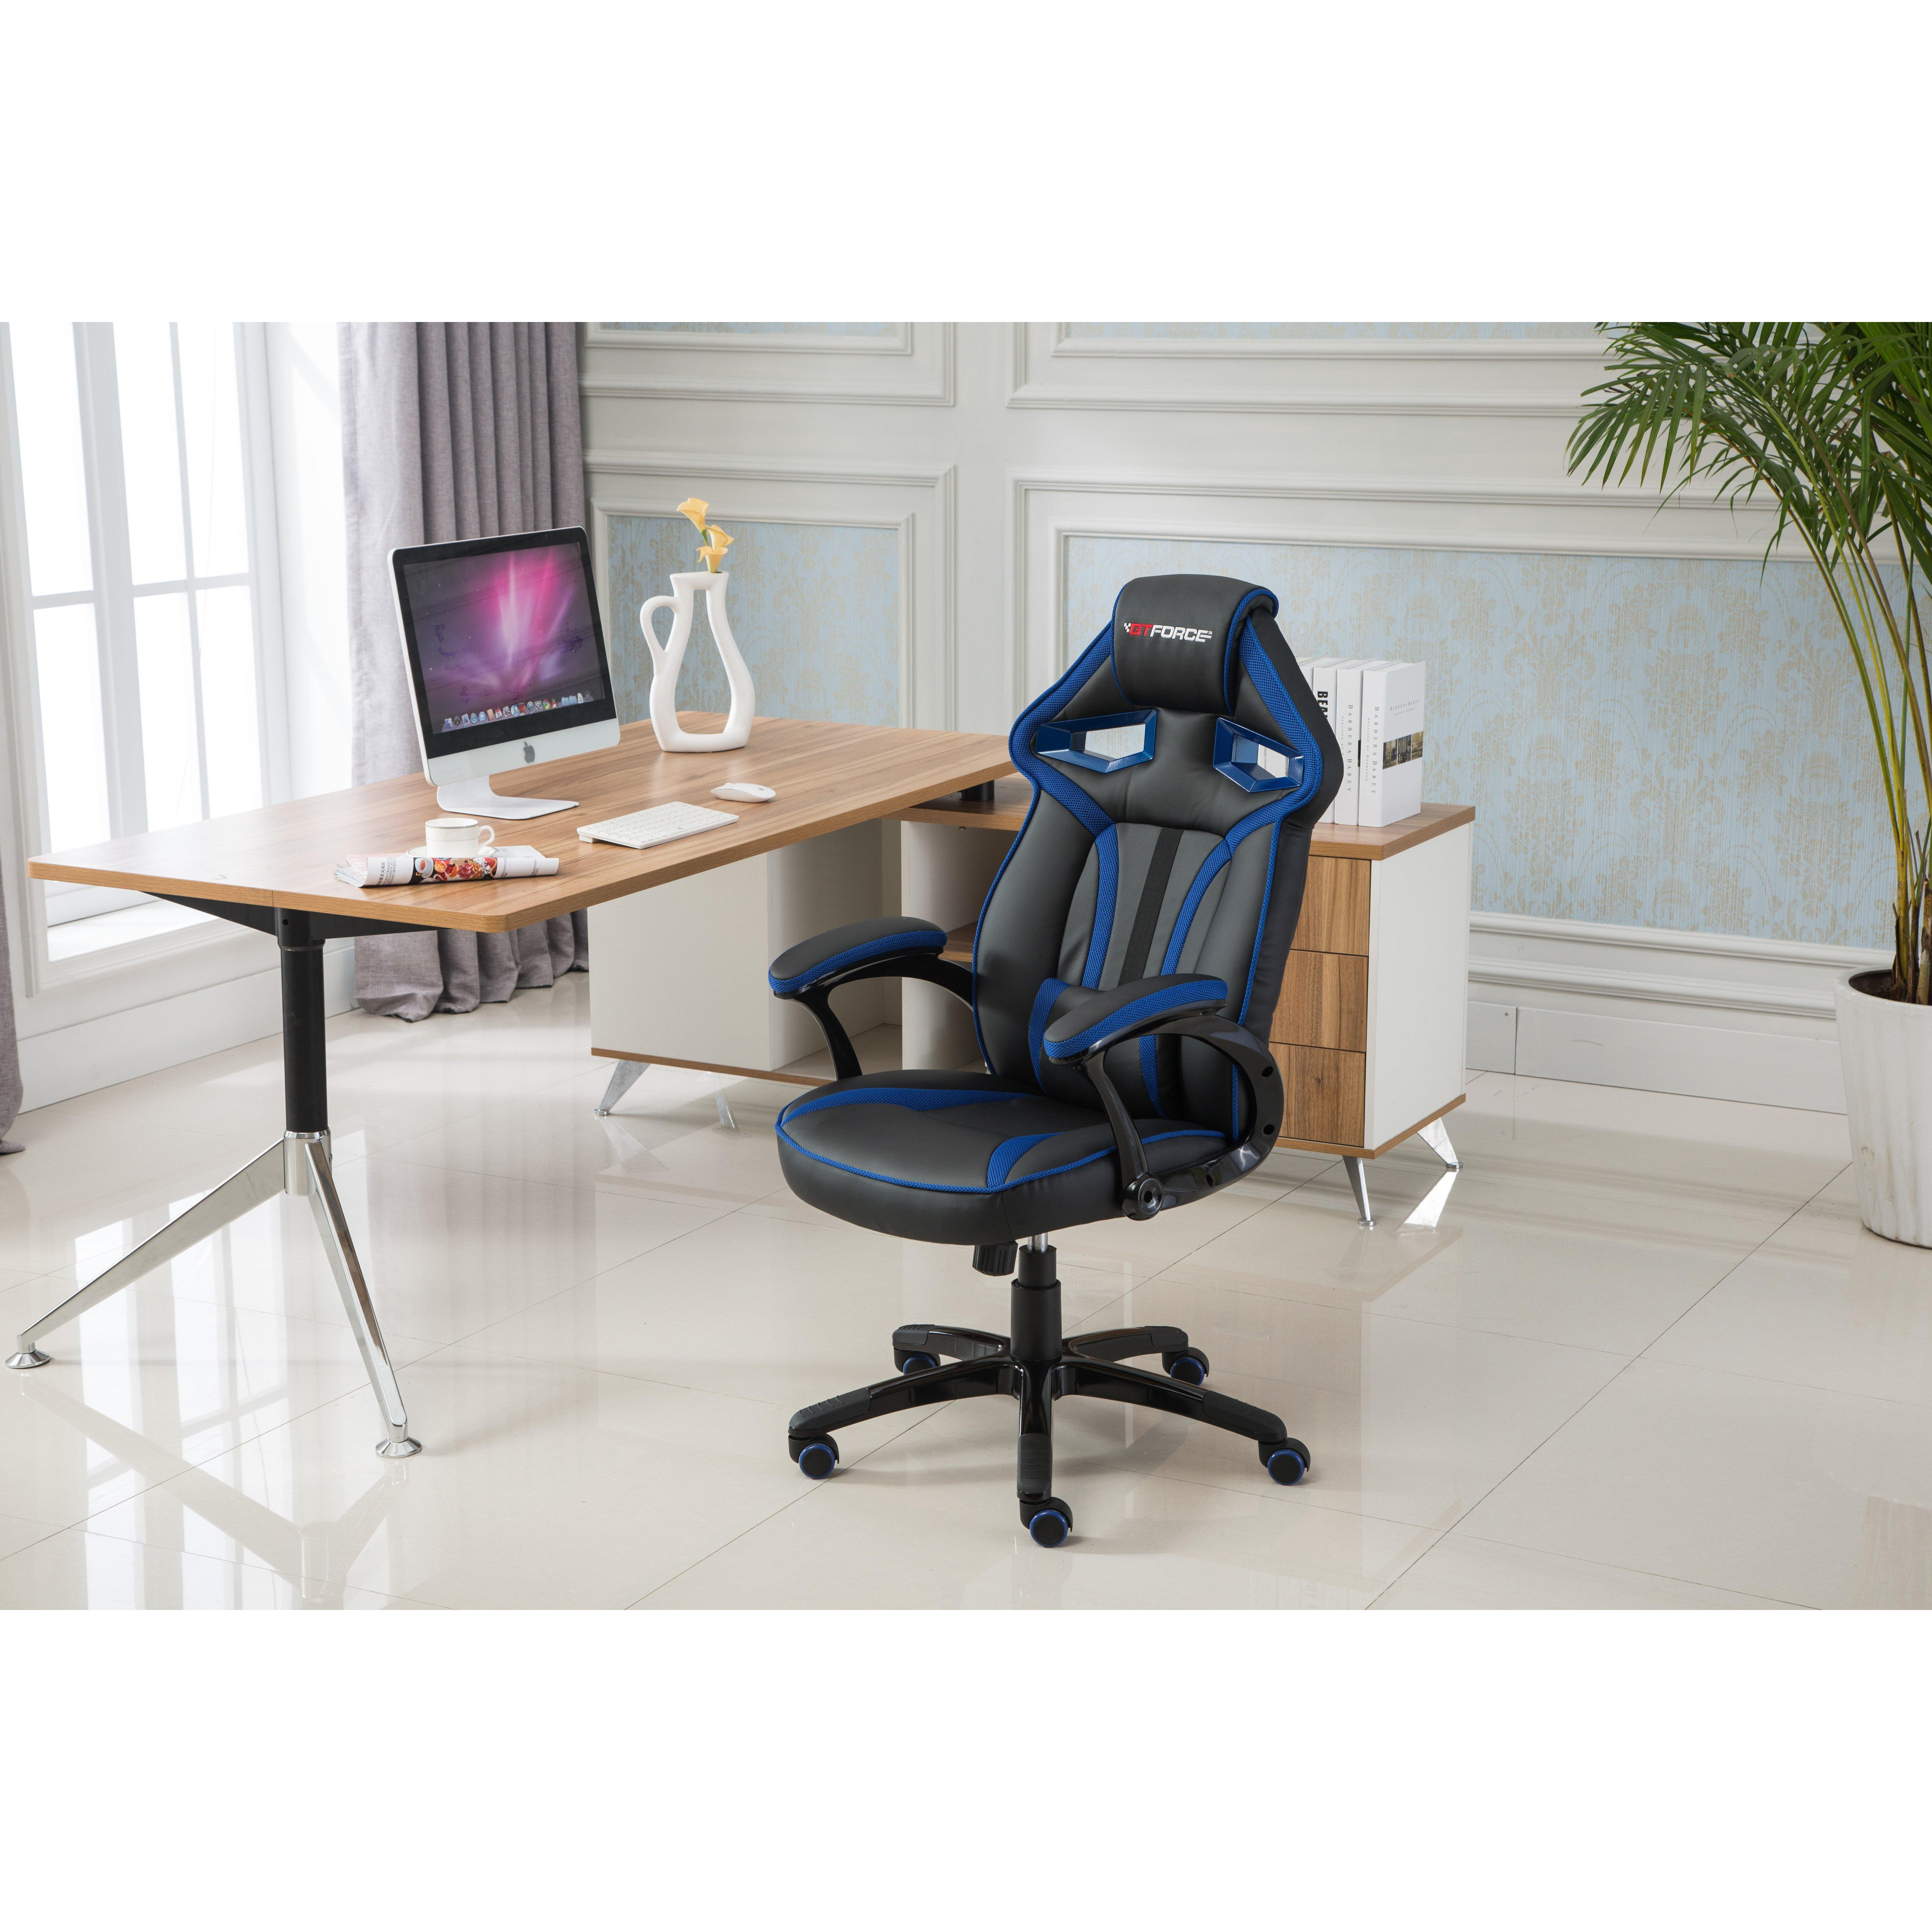 Roadster 1 Office, Adjustable Lumbar Support Faux Leather Gaming Chair - image 1